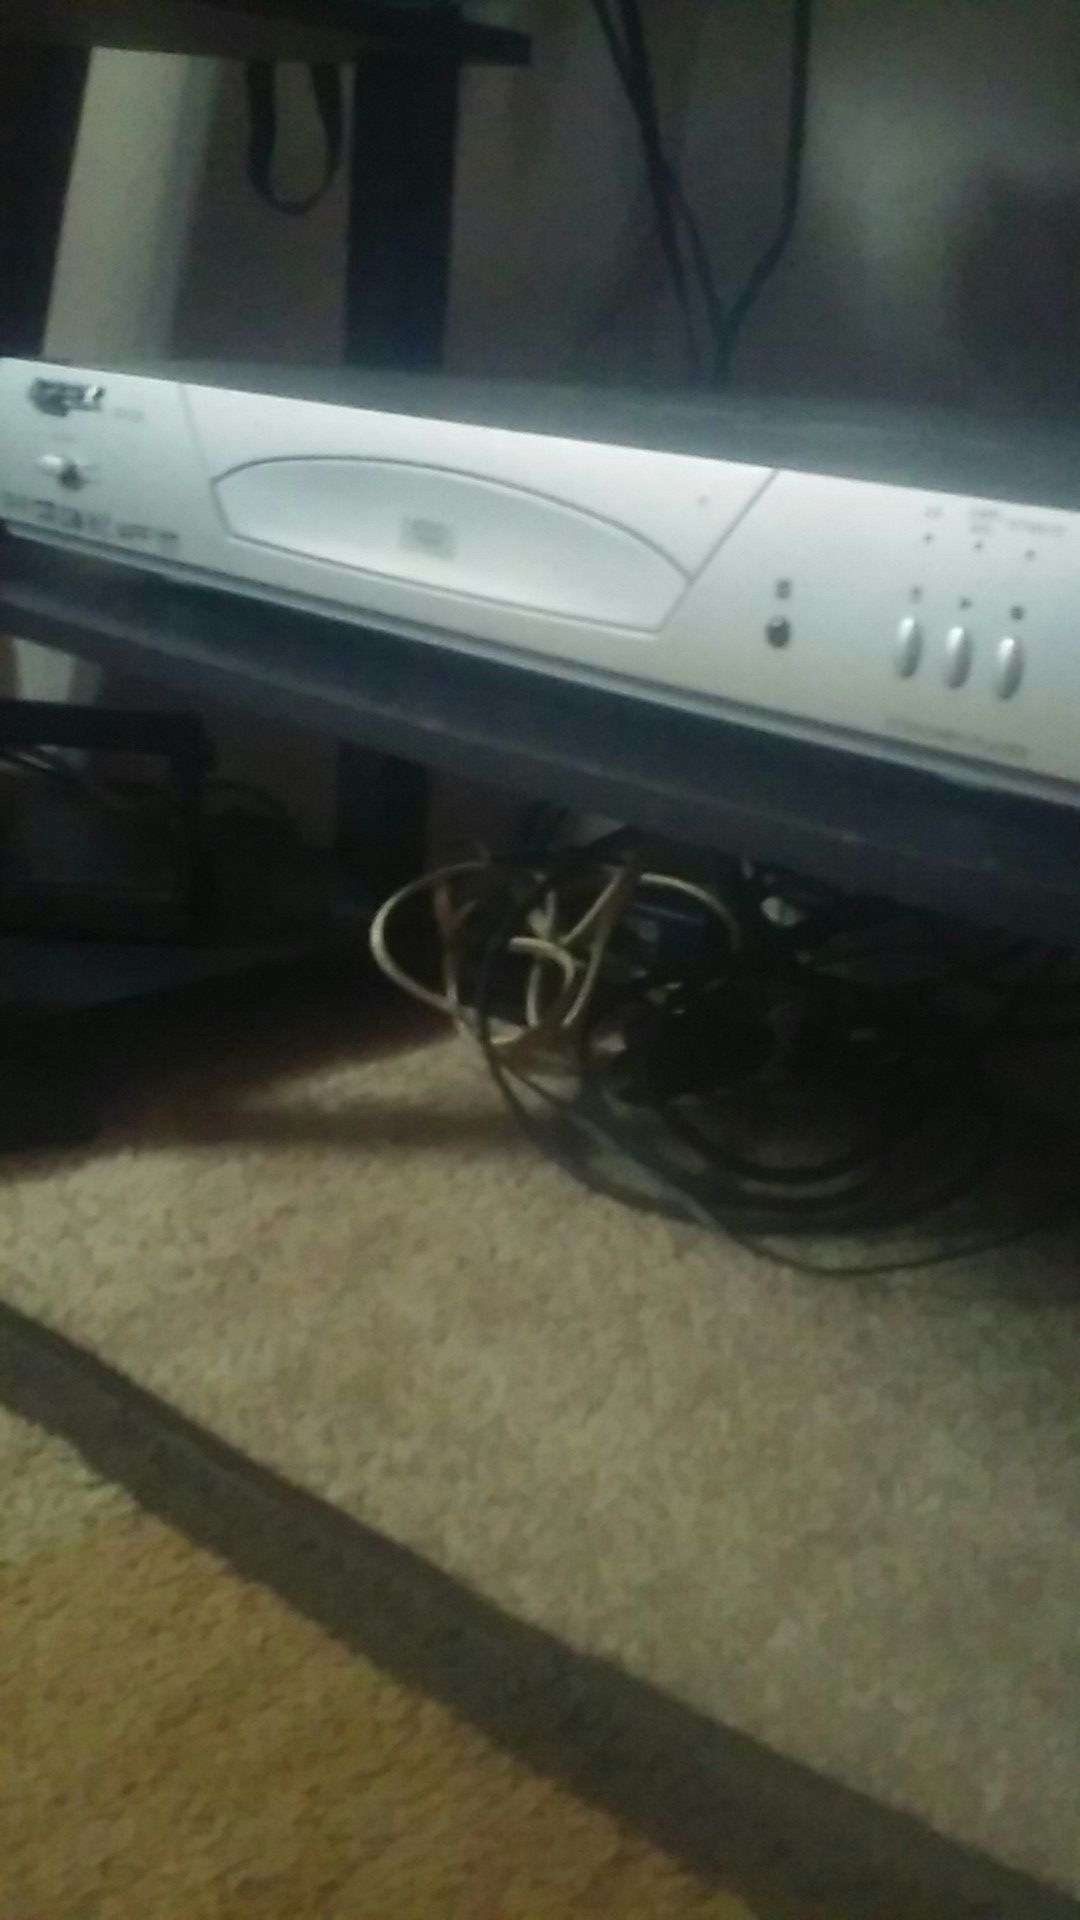 APEX dvd player and dvds